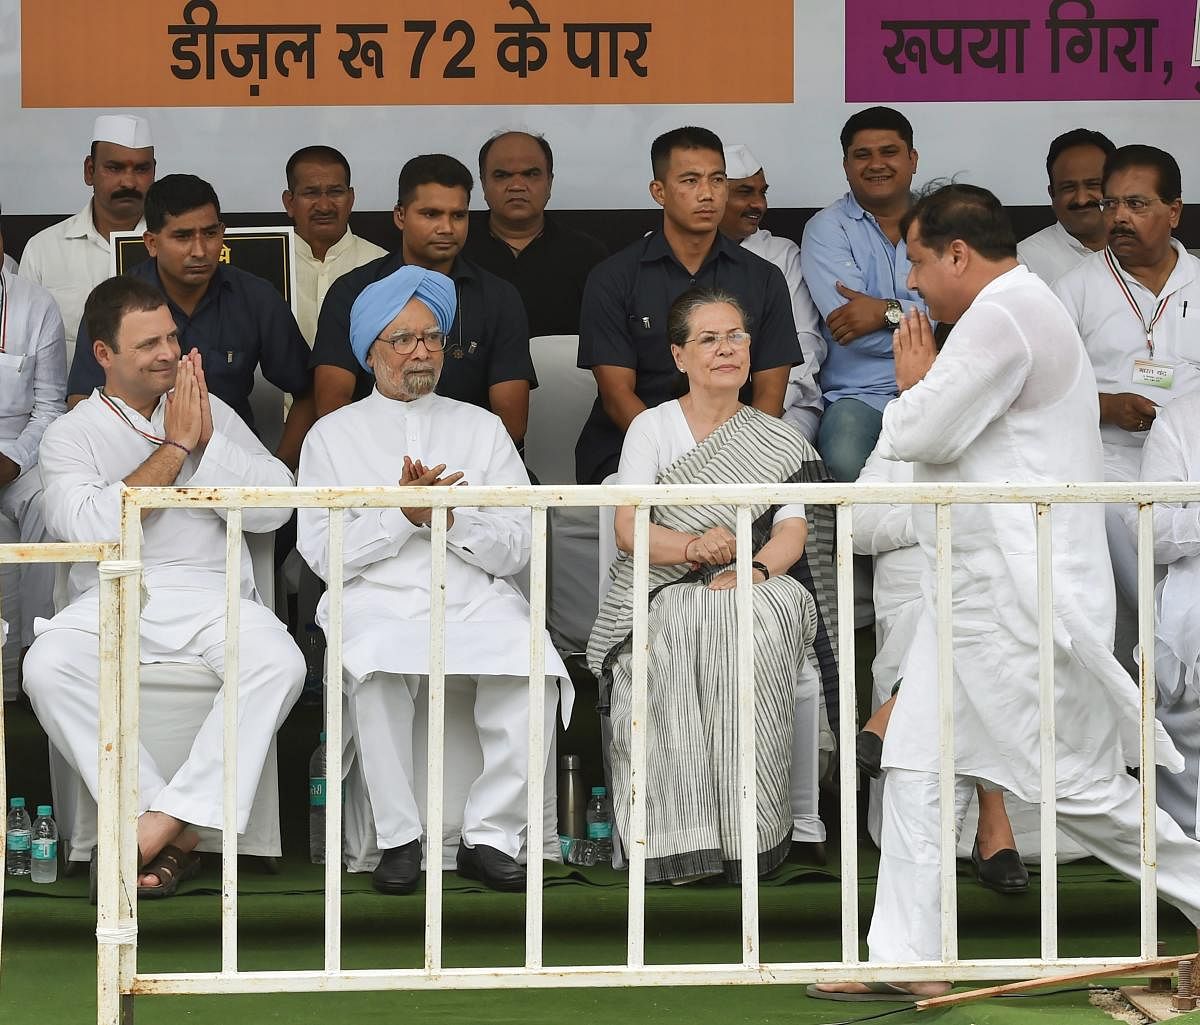 (L-R) Congress President Rahul Gandhi, former Prime Minister Manmohan Singh, former congress president Sonia Gandhi, and AAP leader Sanjay Singh at a 'dharna' during the 'Bharat Bandh' protest called by Congress and other parties against fuel price hike and depreciation of the rupee, in New Delhi, Monday, Sept 10, 2018. (PTI Photo)